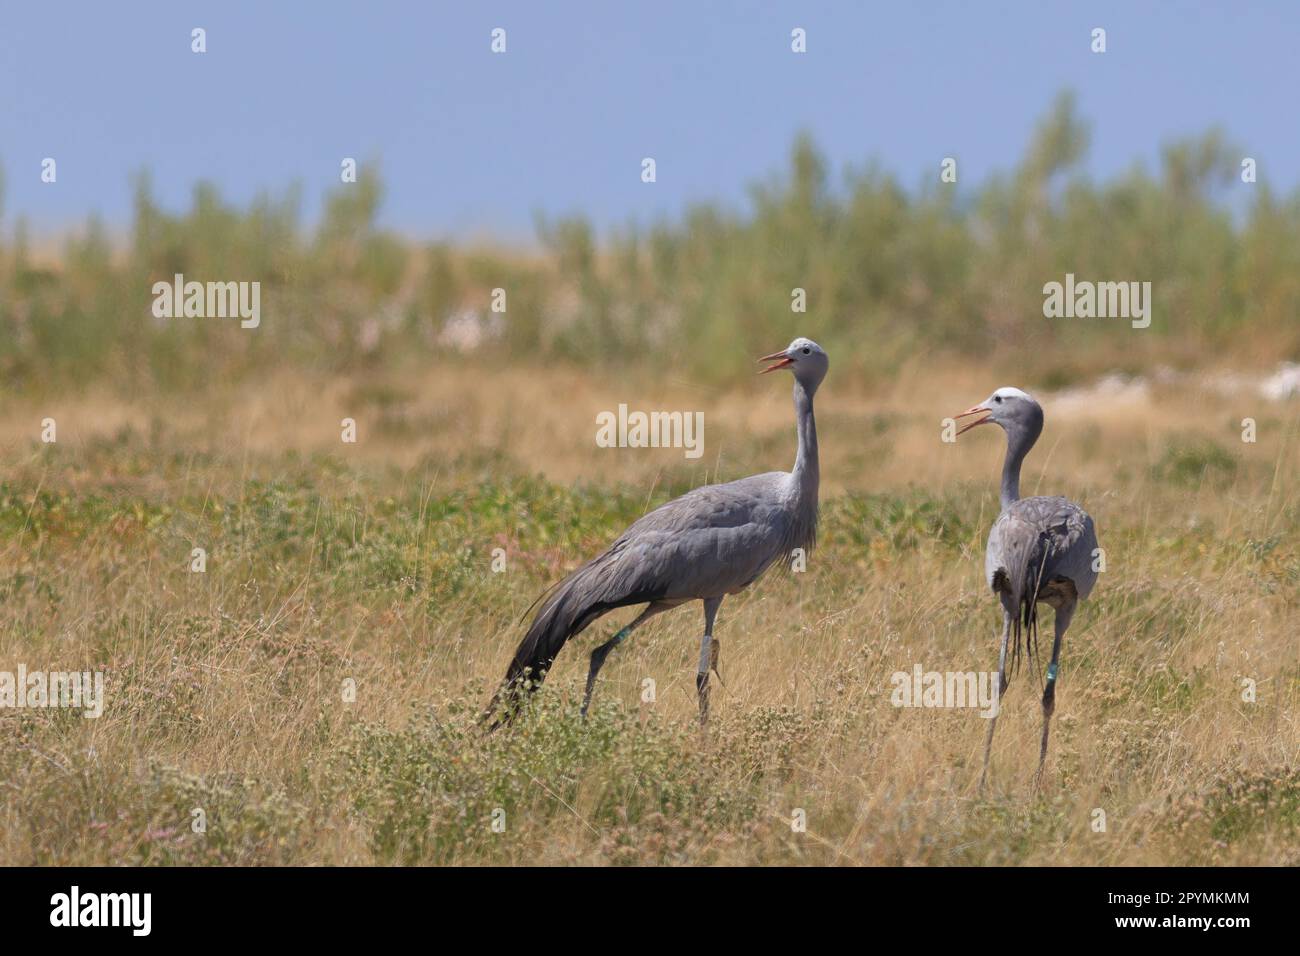 blue cranes in the wild of Etosha National Park in Namibia Stock Photo